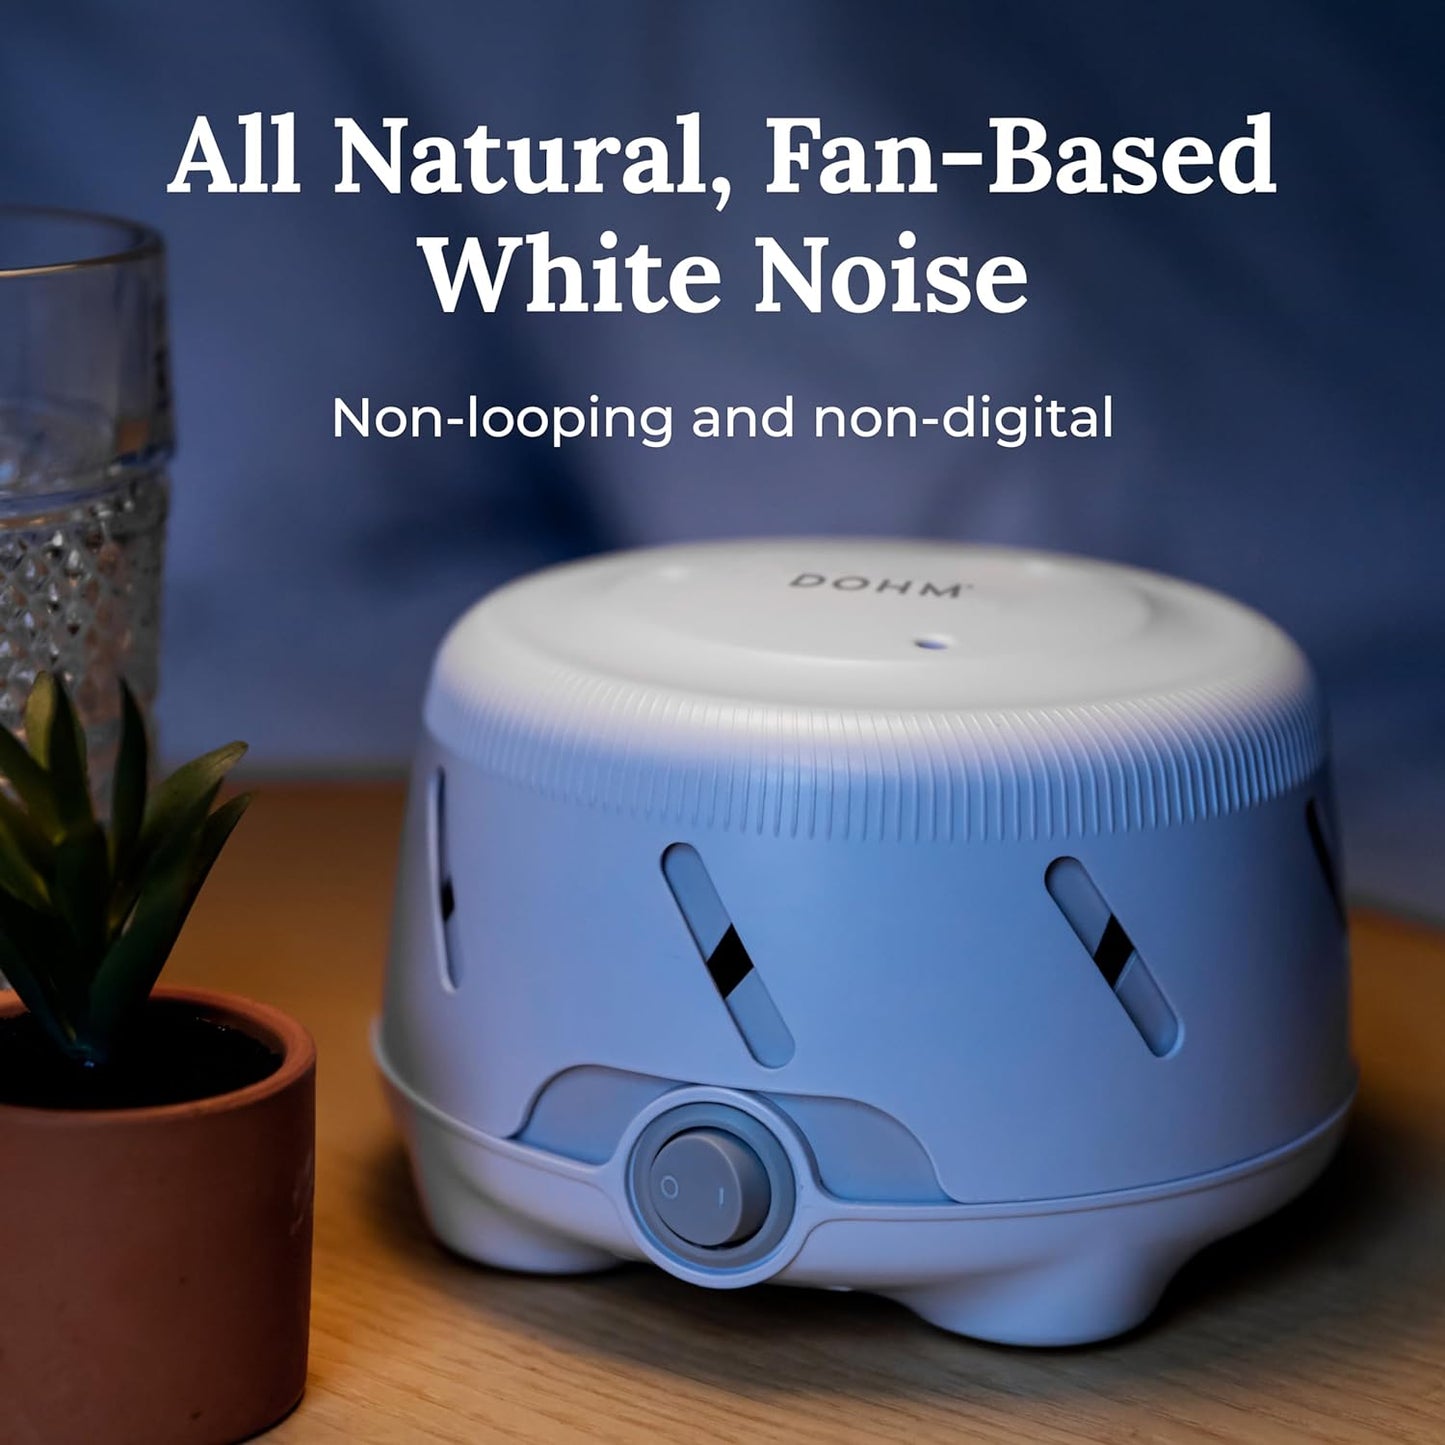 Yogasleep Dohm UNO White Noise Machine with Real Fan Inside